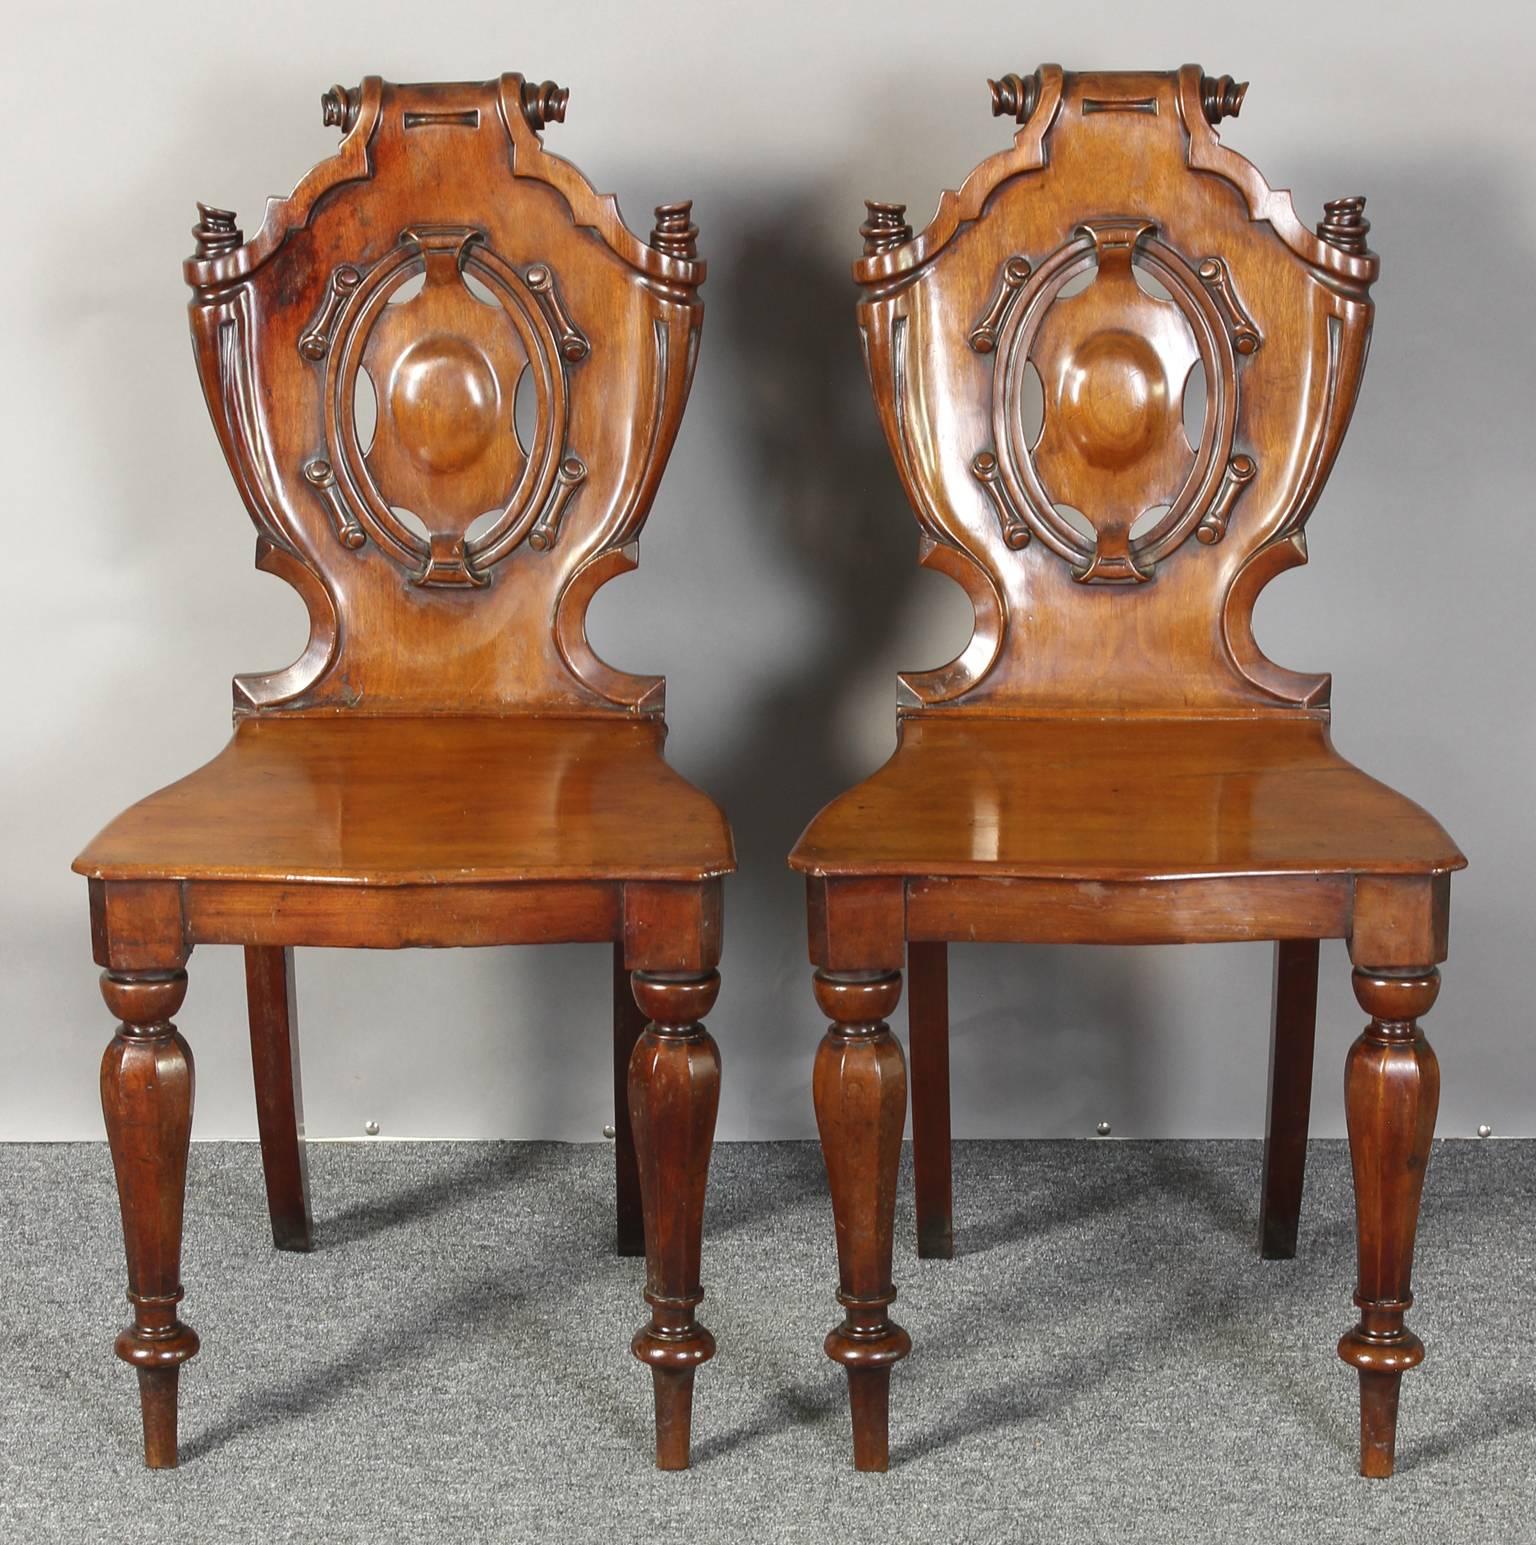 A fine pair of English William IV period mahogany hall chairs with heavily carved cartouche shaped backs and plank seats supported on turned tapering legs.